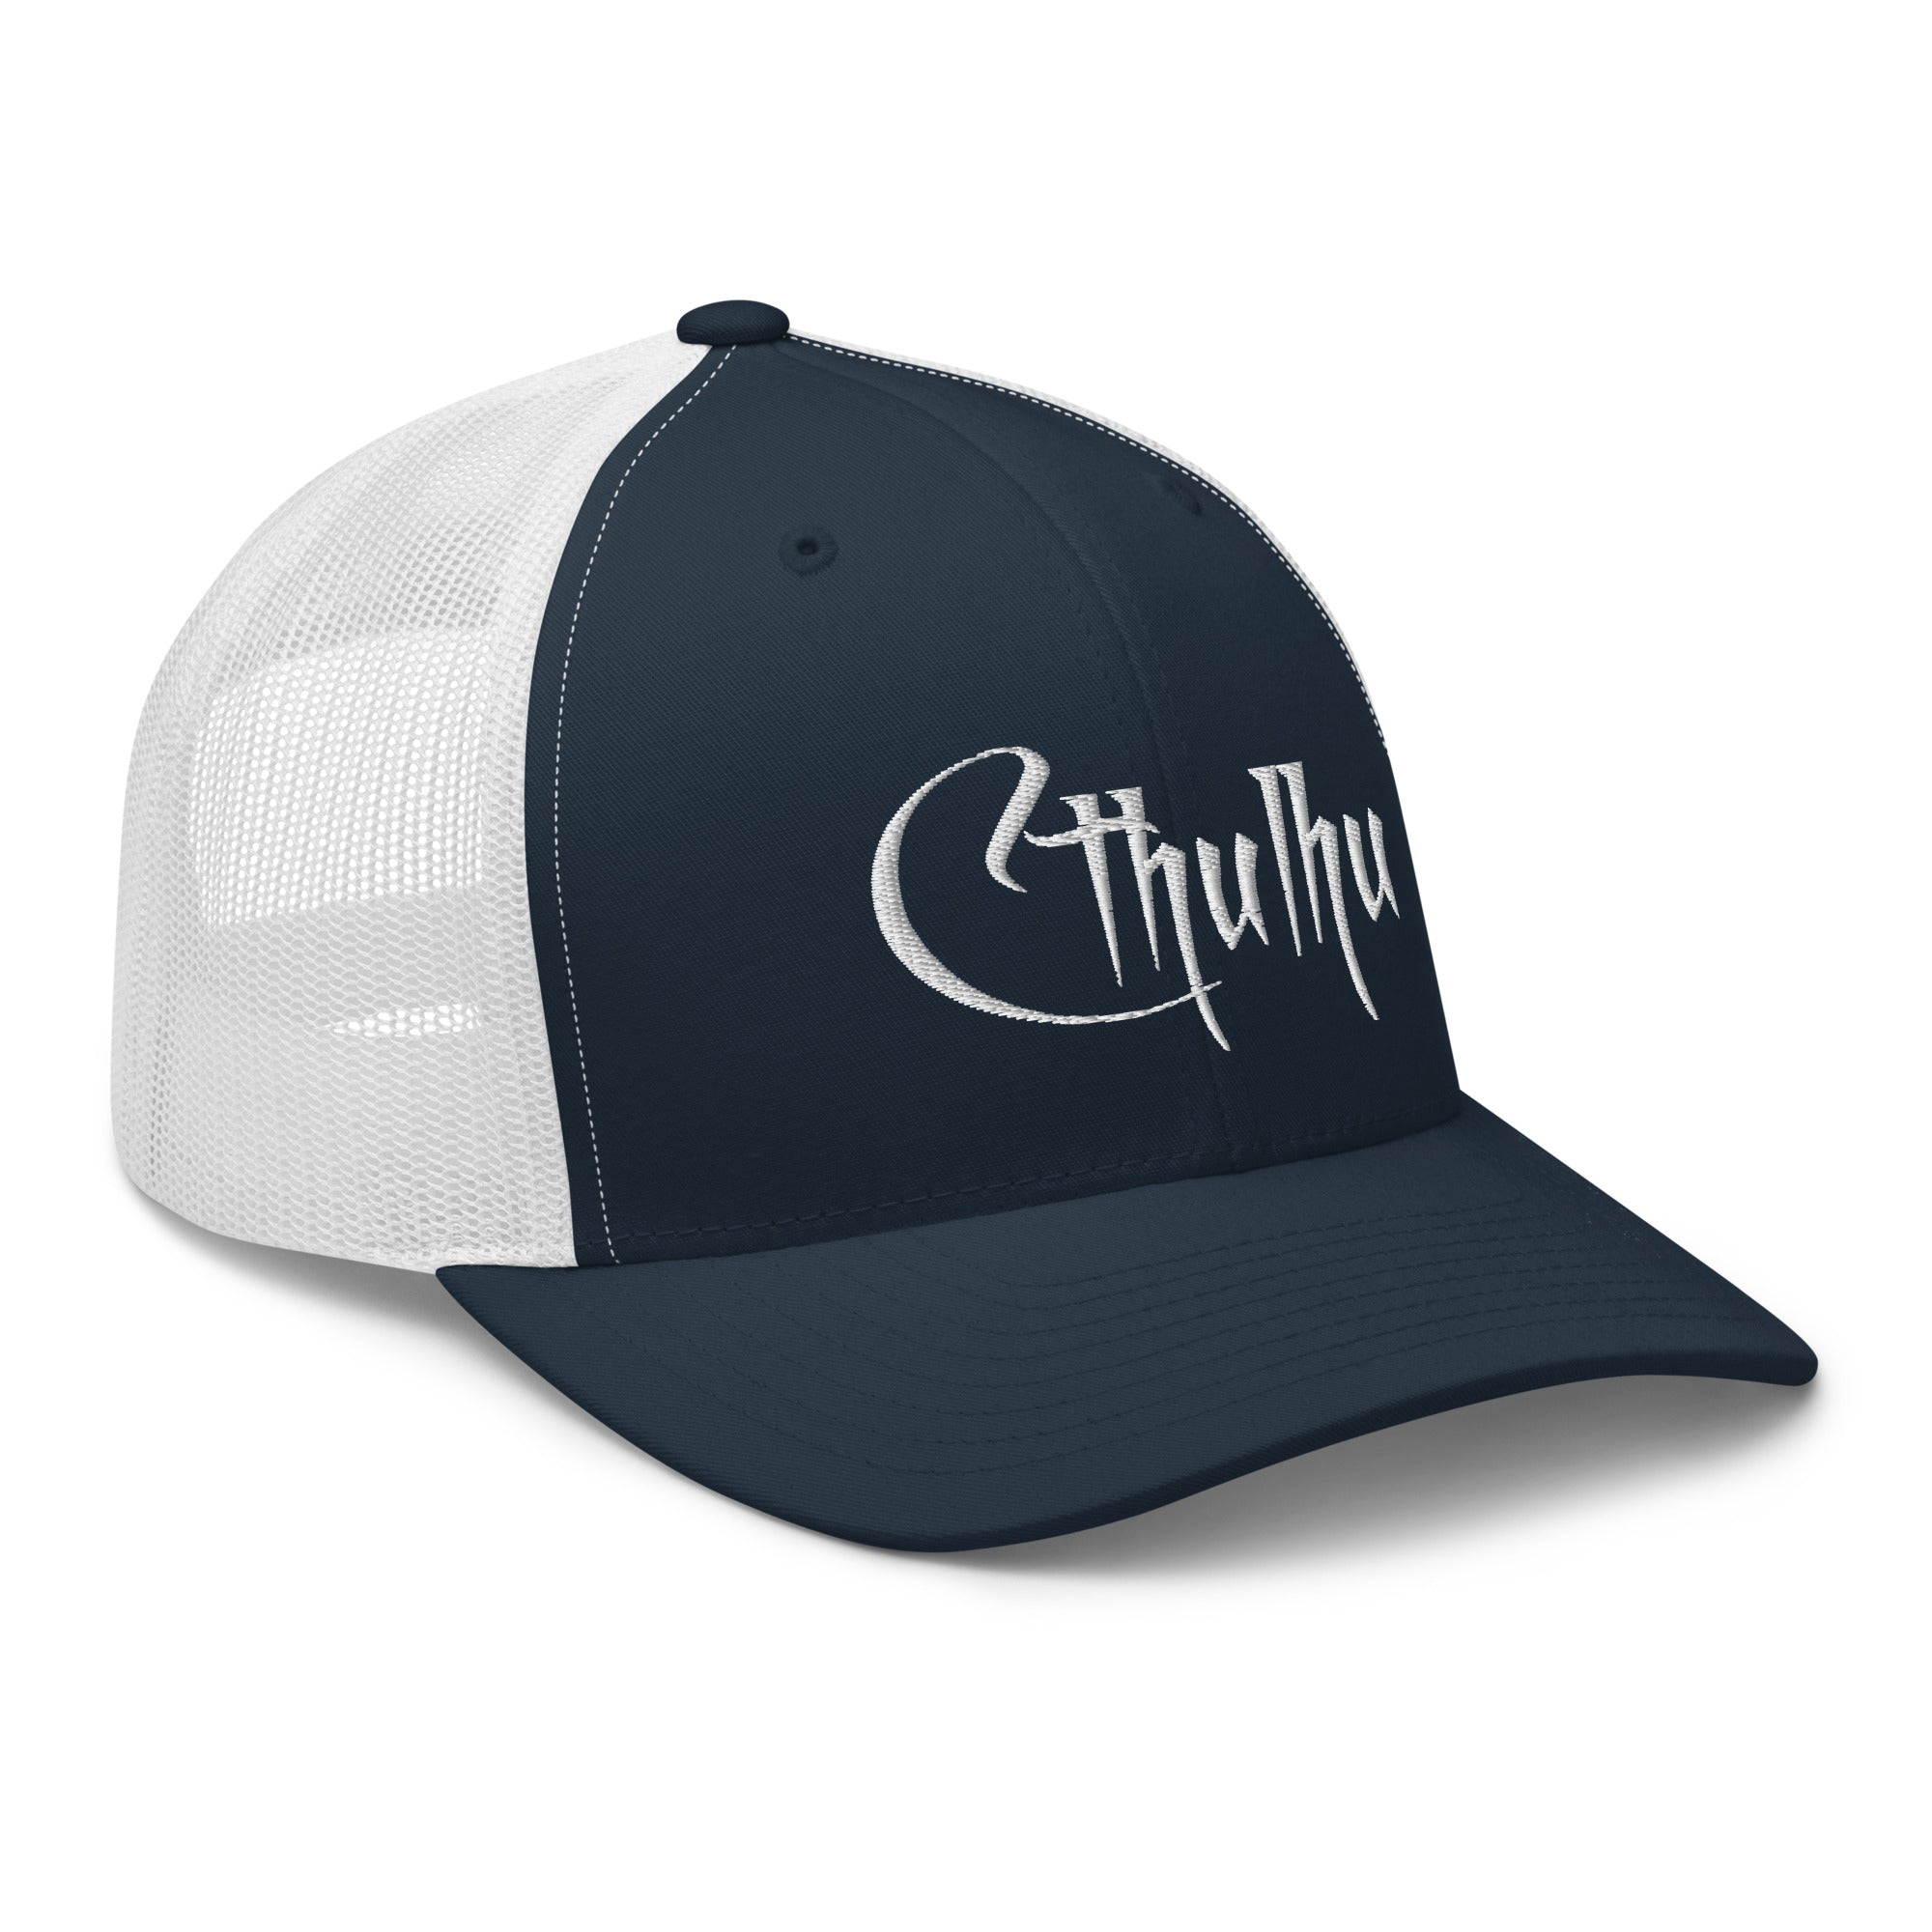 White Call of Cthulhu Great Old Ones Embroidered Trucker Cap Snapback Hat